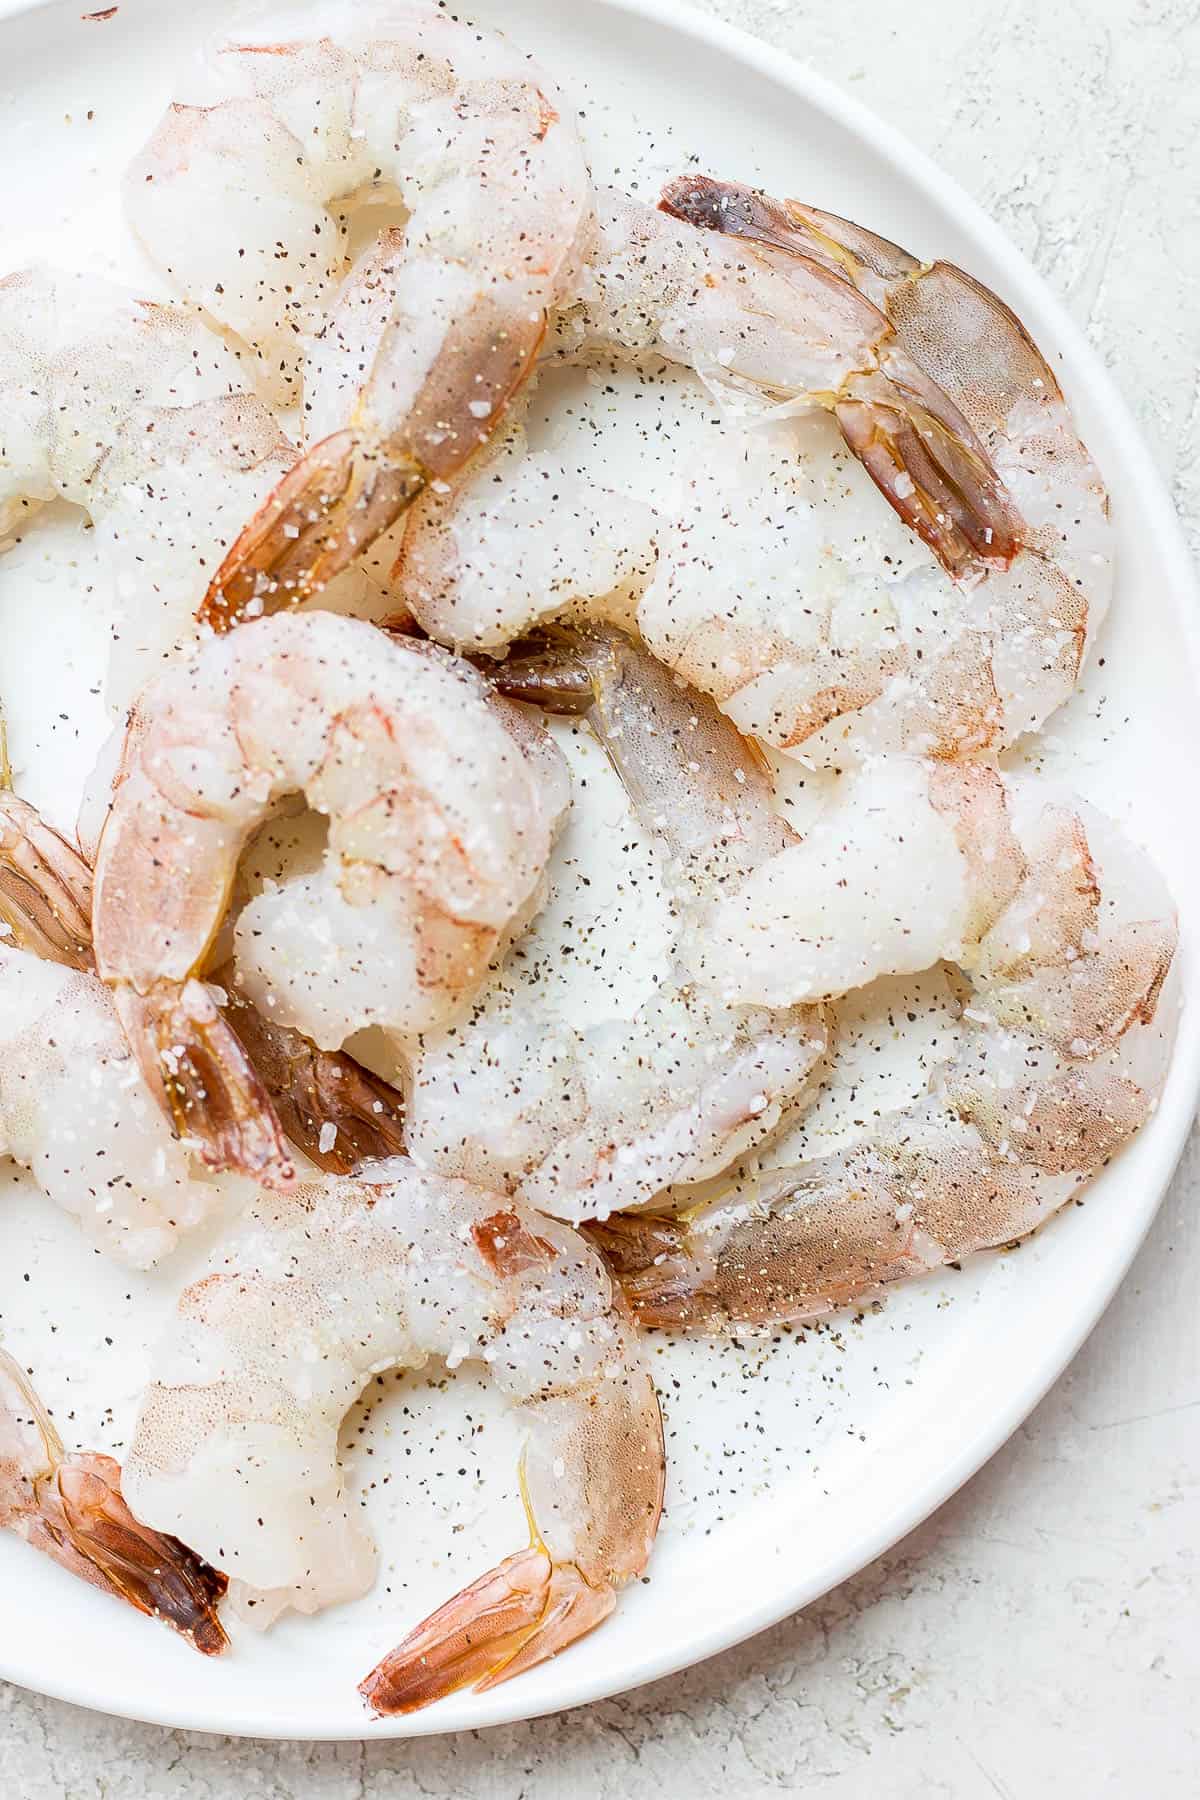 Shrimp on a plate with salt and pepper sprinkled on top.